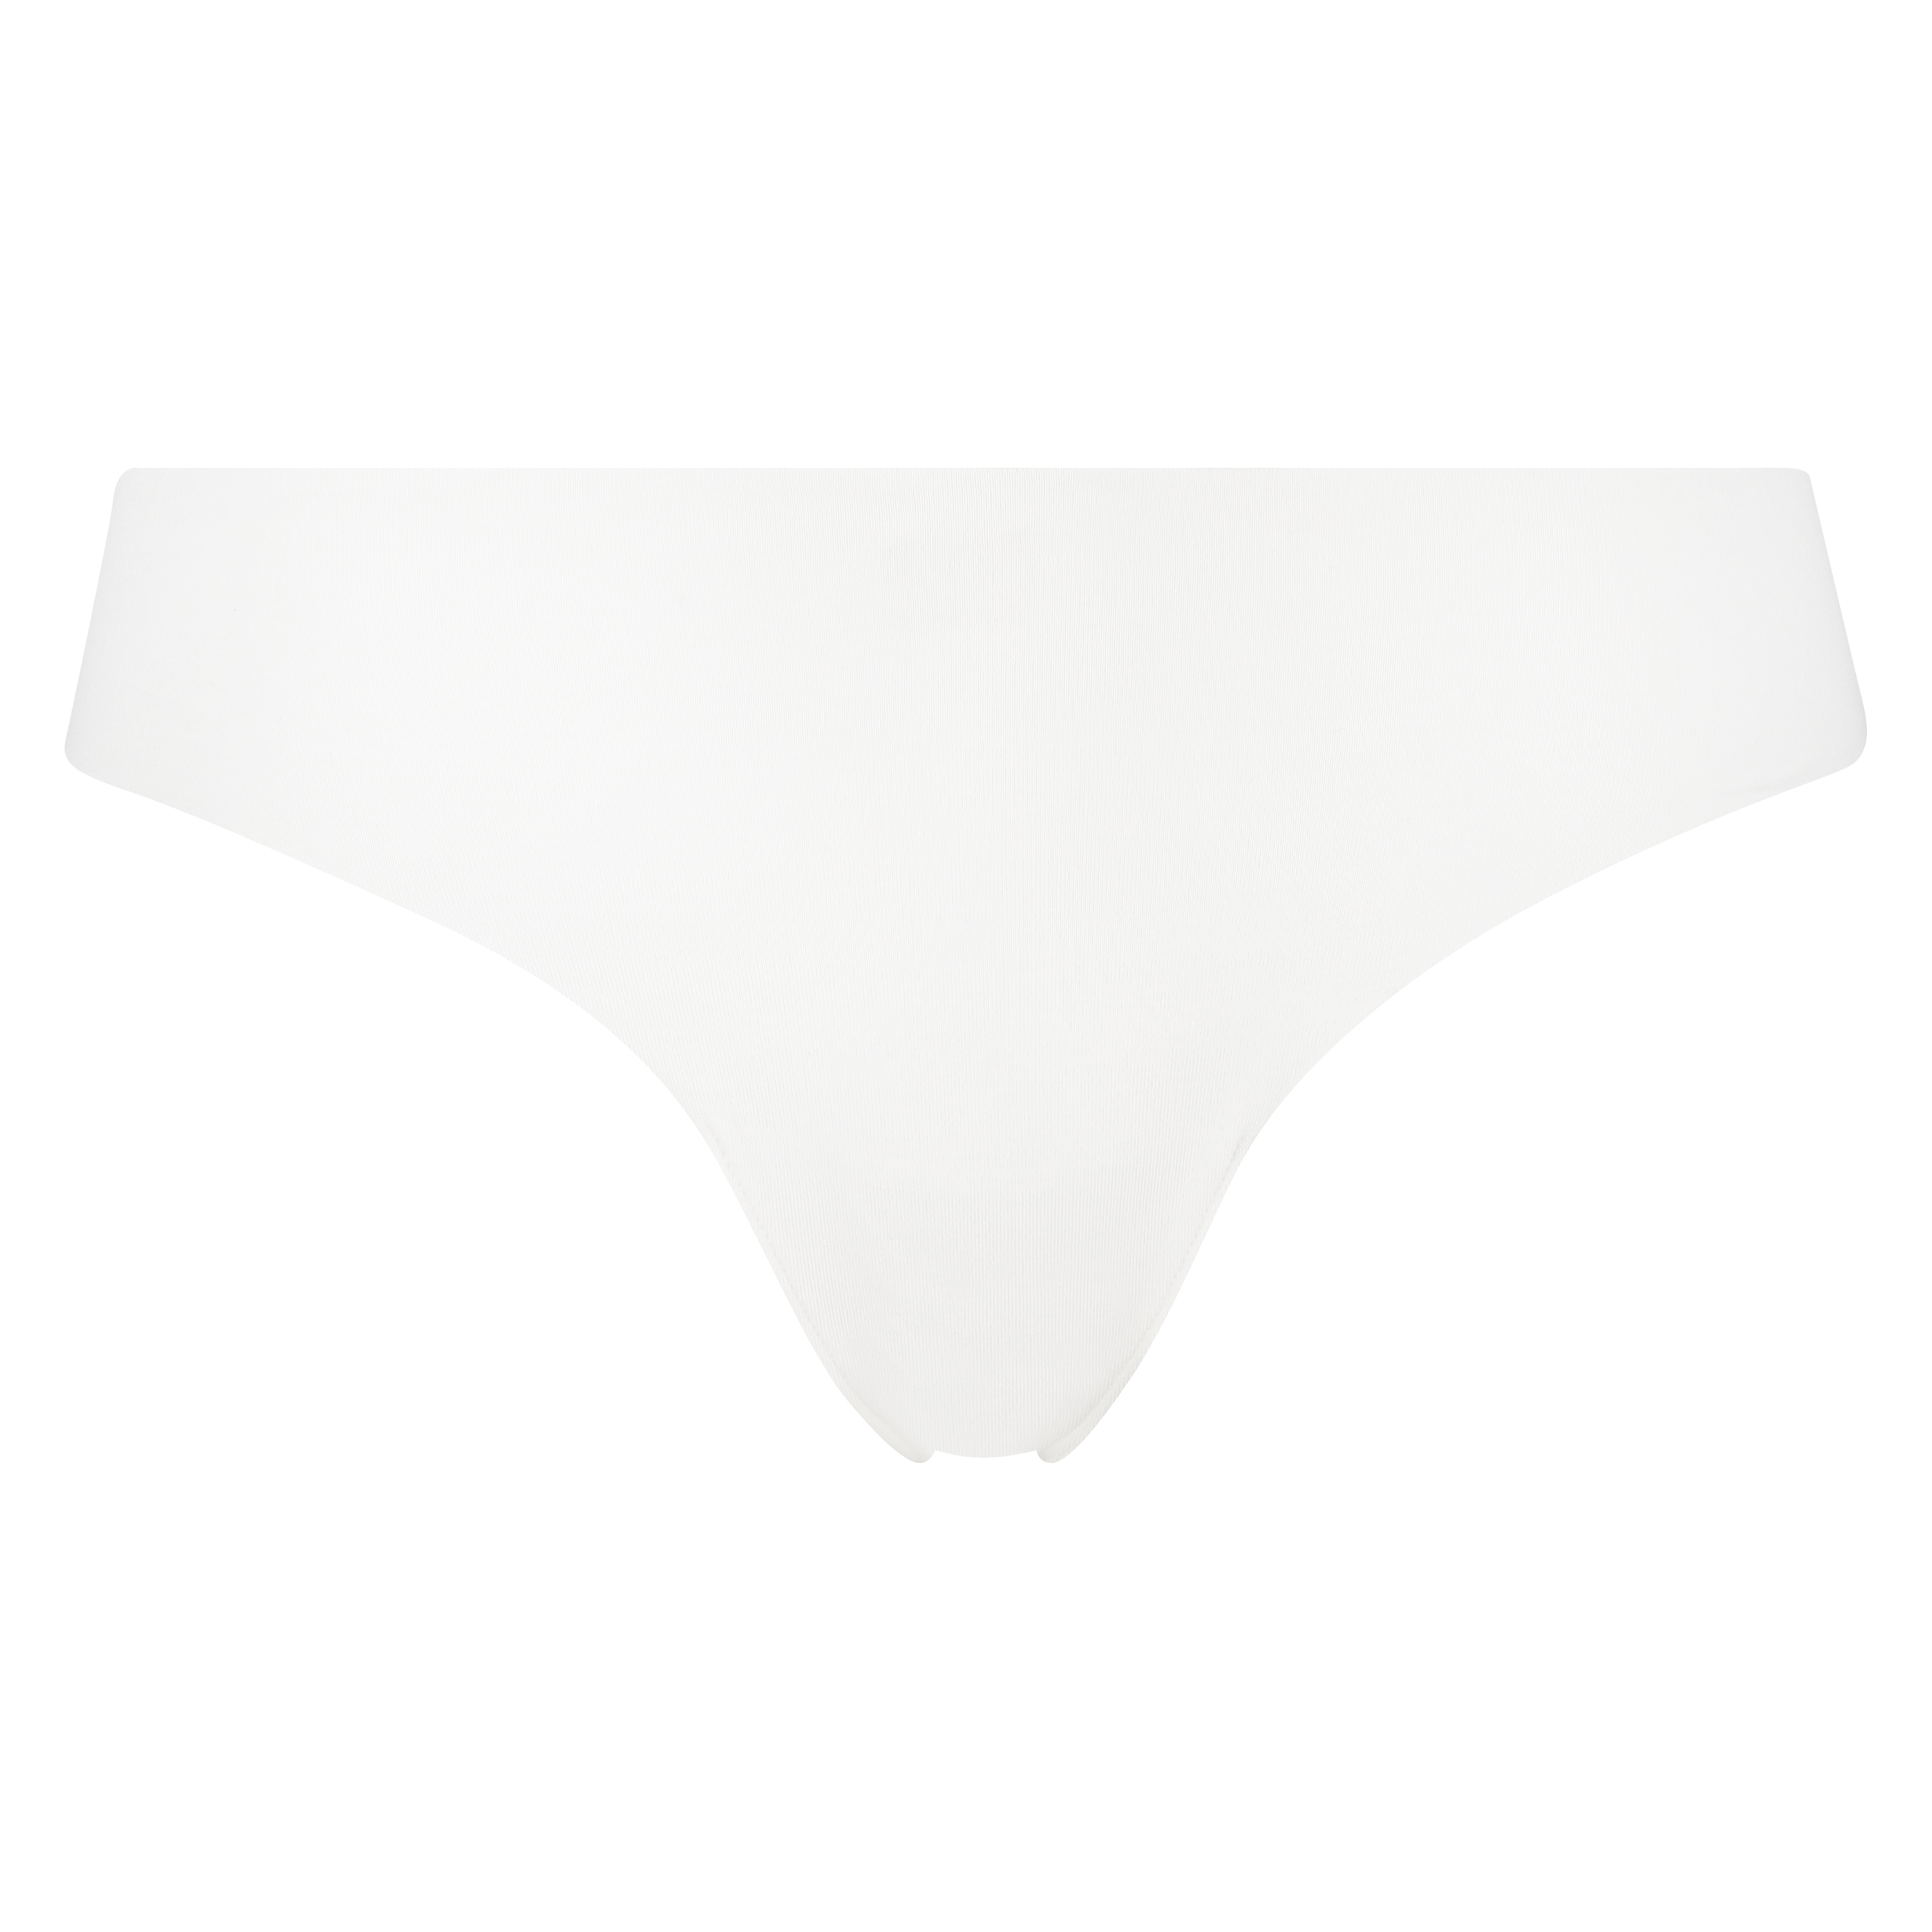 Invisible cotton thong, White, main